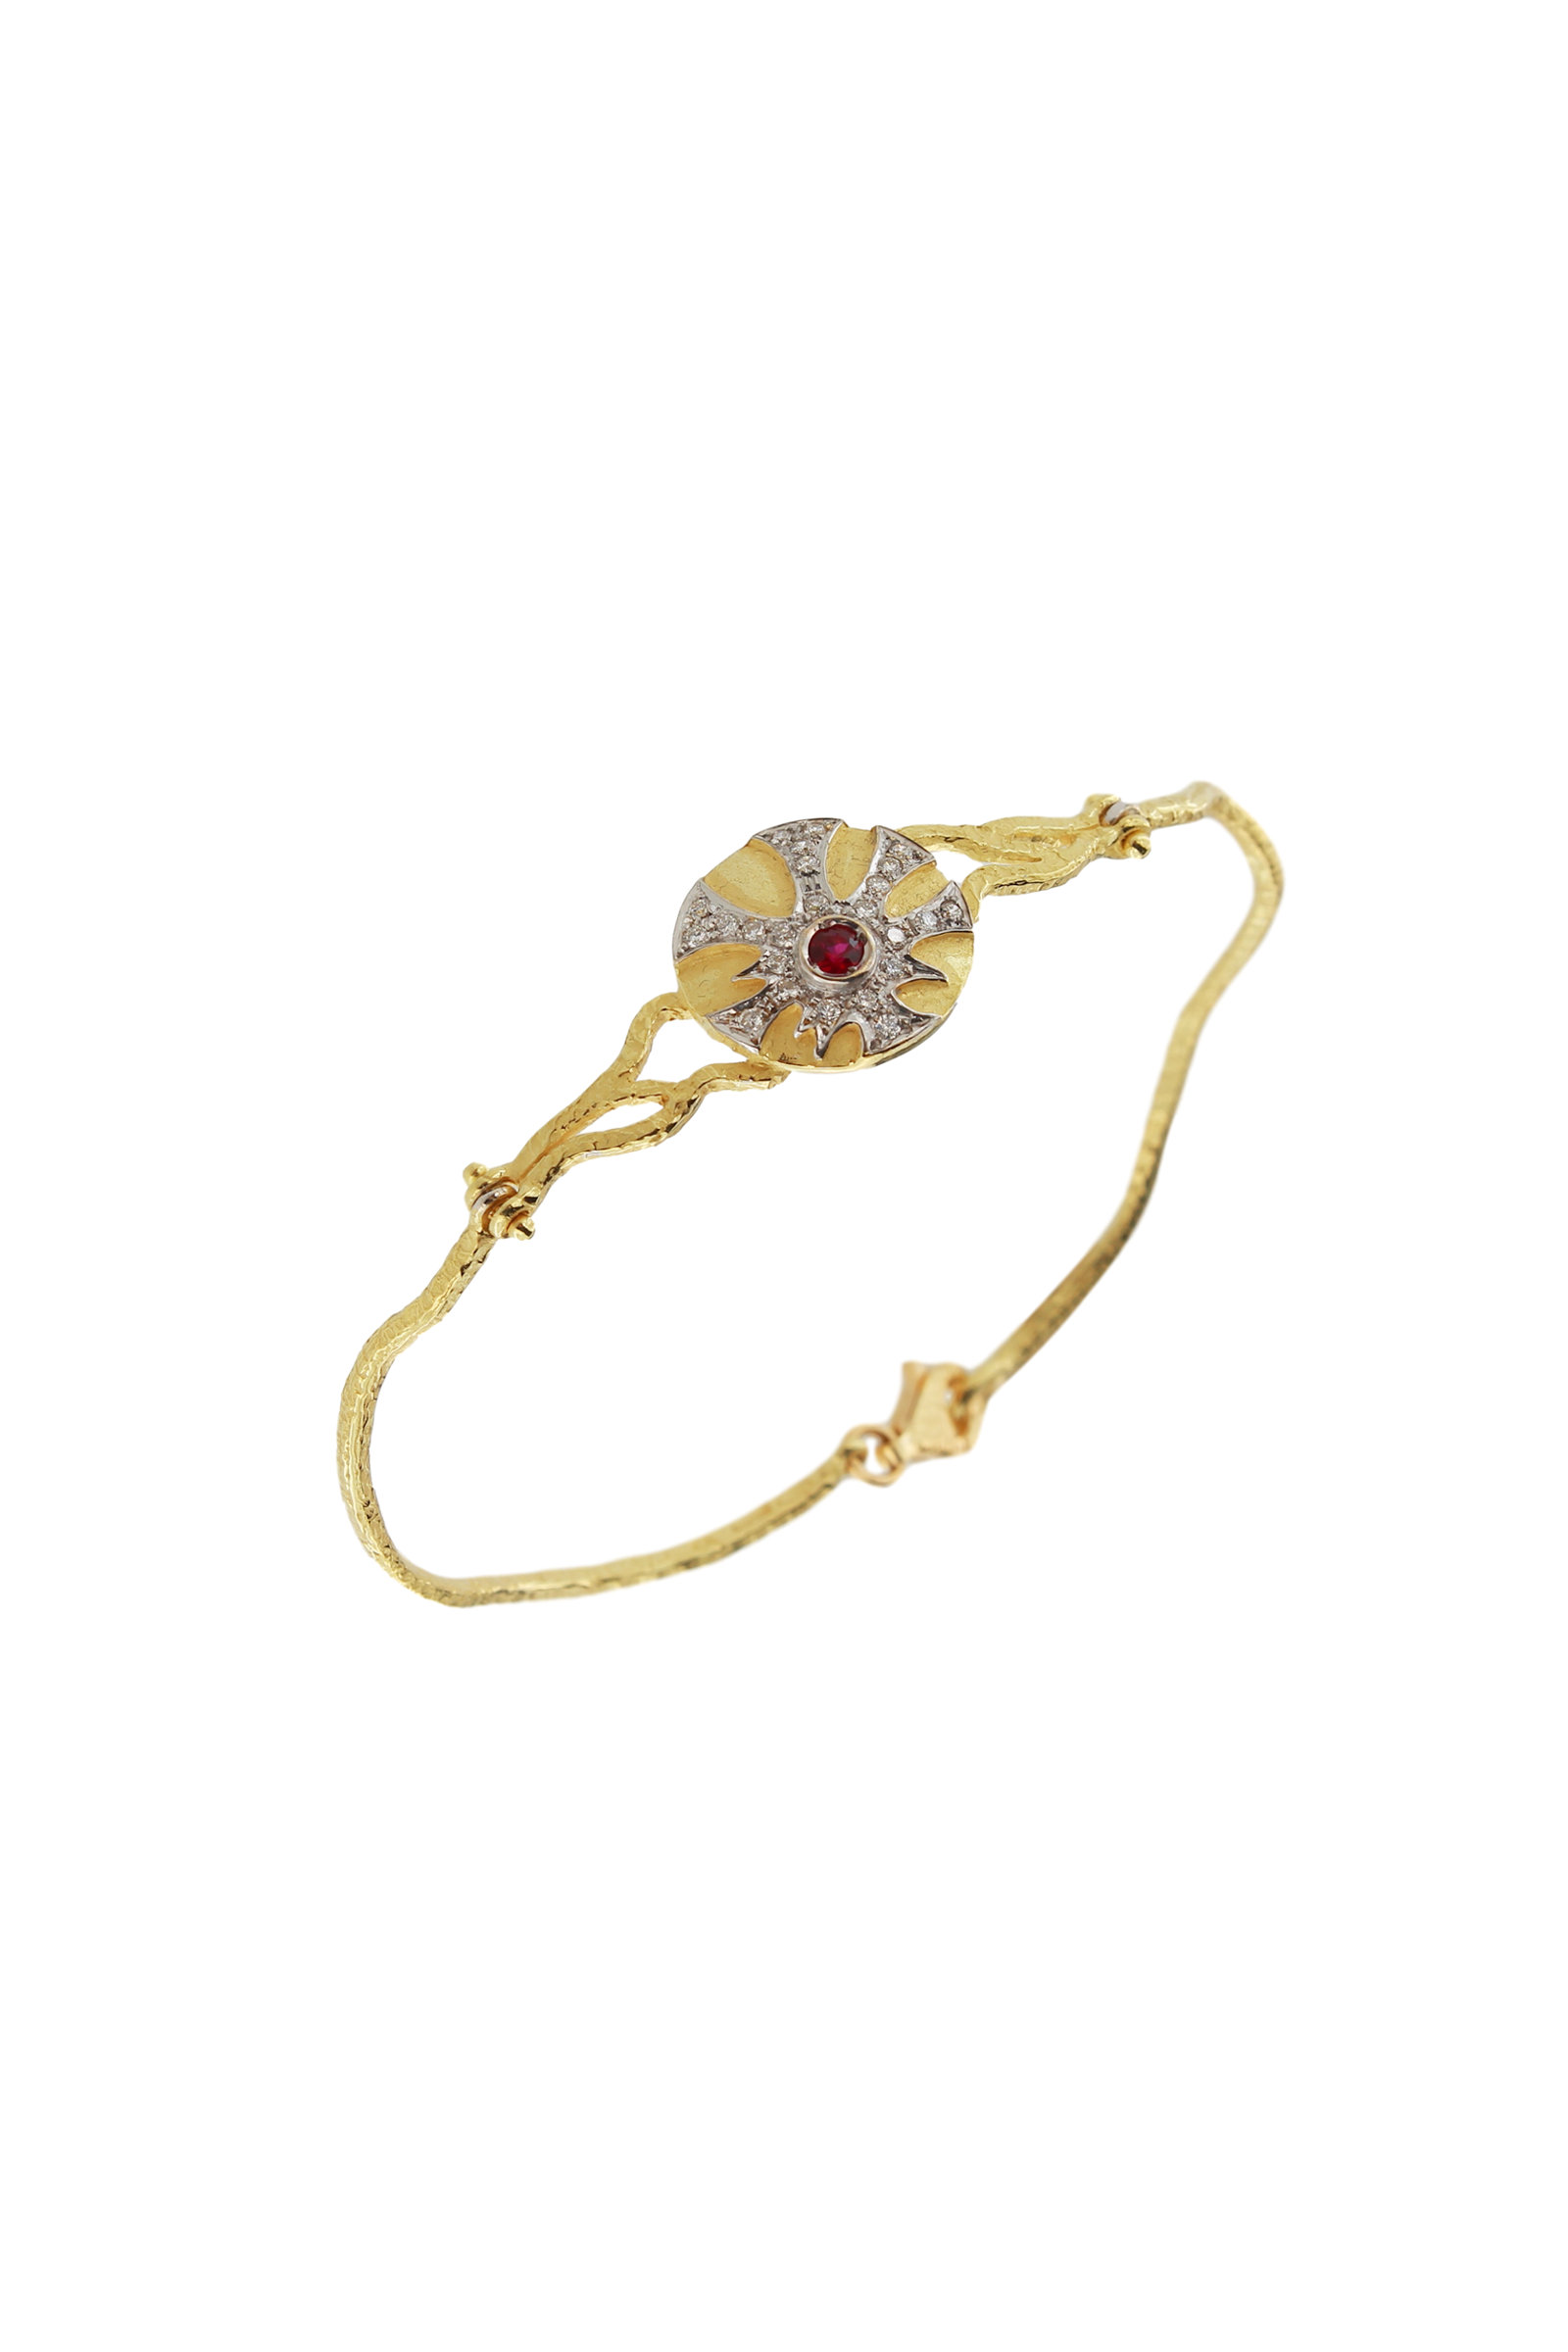 SB269A-18-Kt-Yellow-Gold-Bracelet-with-Ruby-and-Diamonds-1